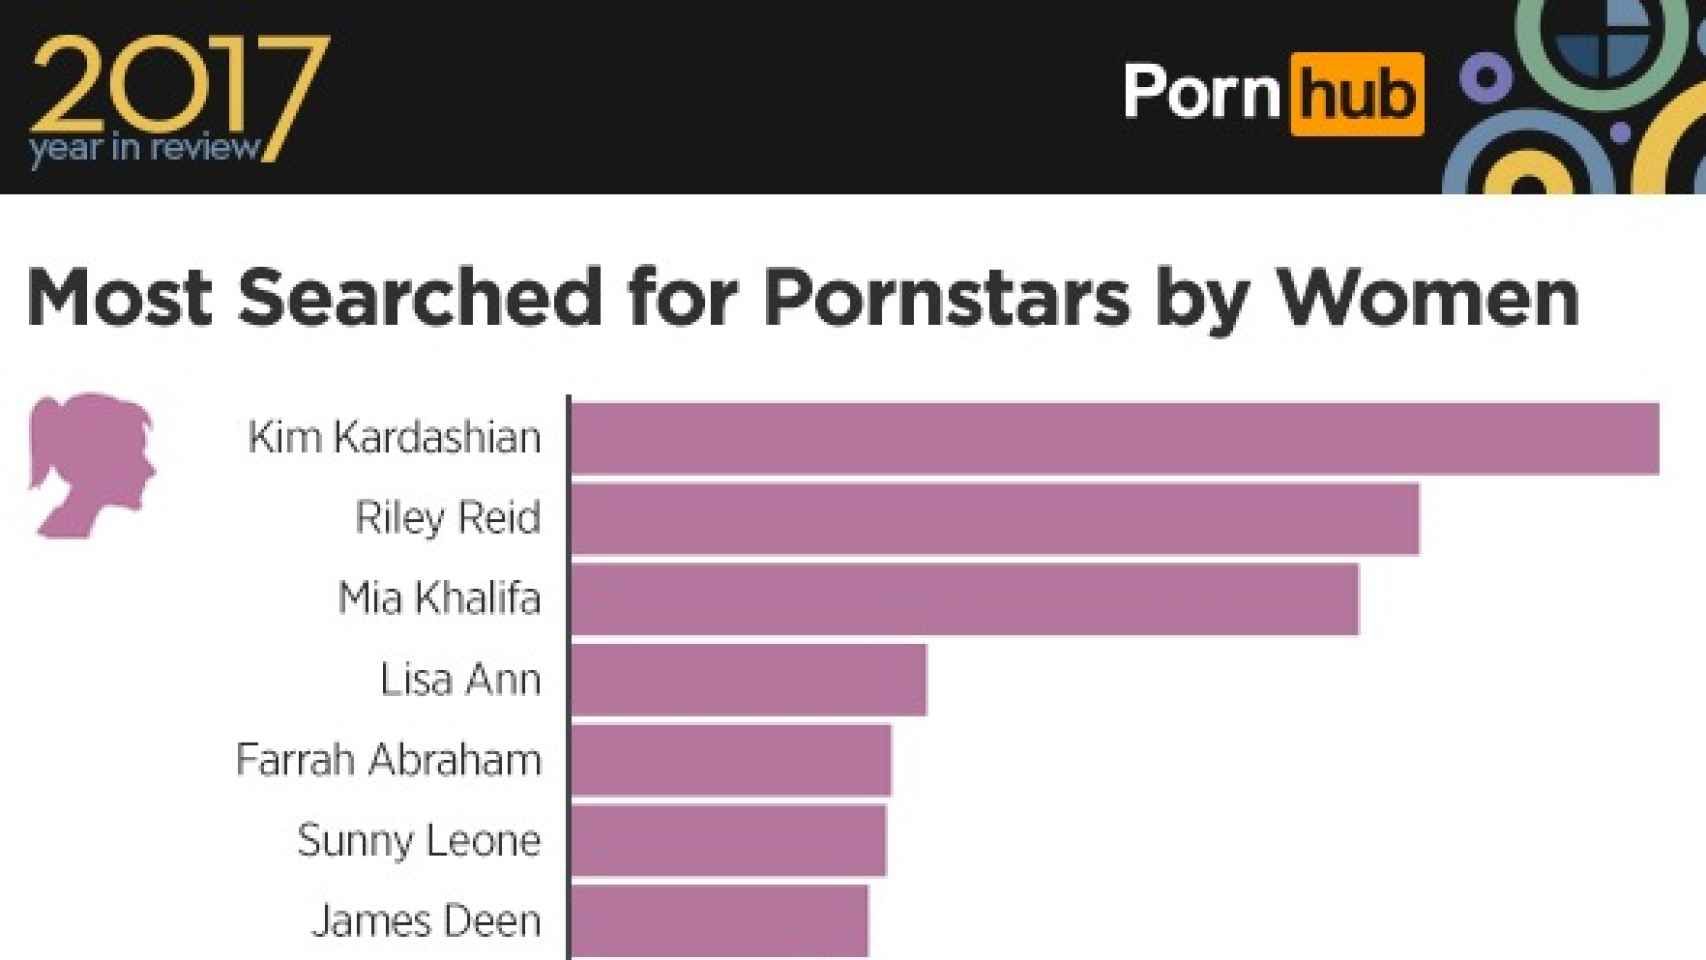 3-pornhub-insights-2017-year-review-gender-most-searched-pornstars